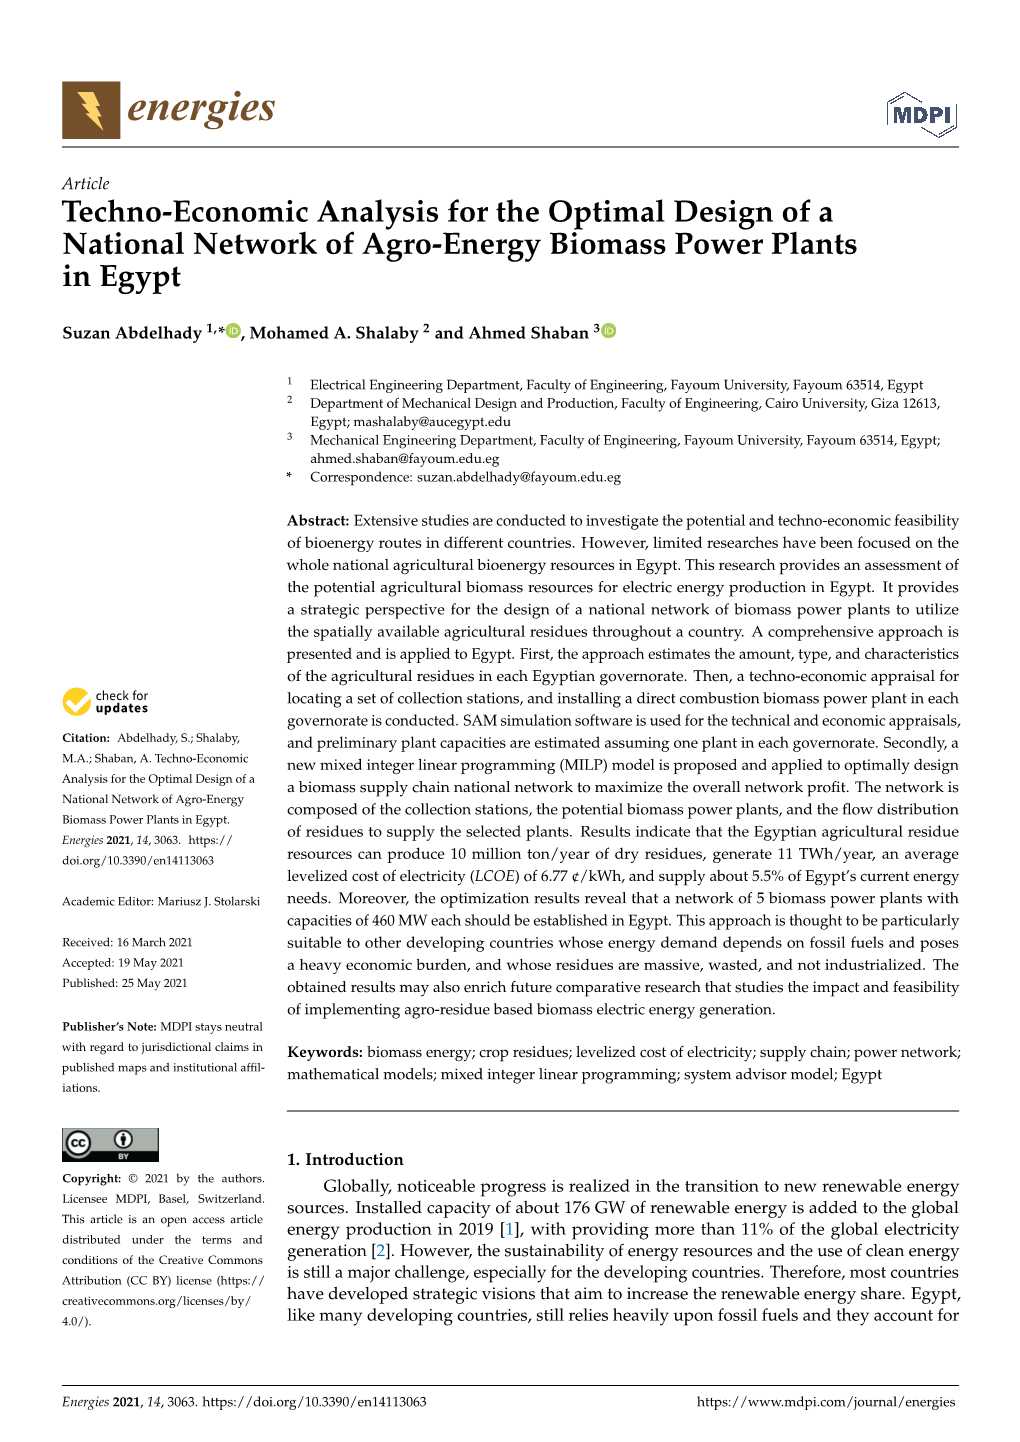 Techno-Economic Analysis for the Optimal Design of a National Network of Agro-Energy Biomass Power Plants in Egypt